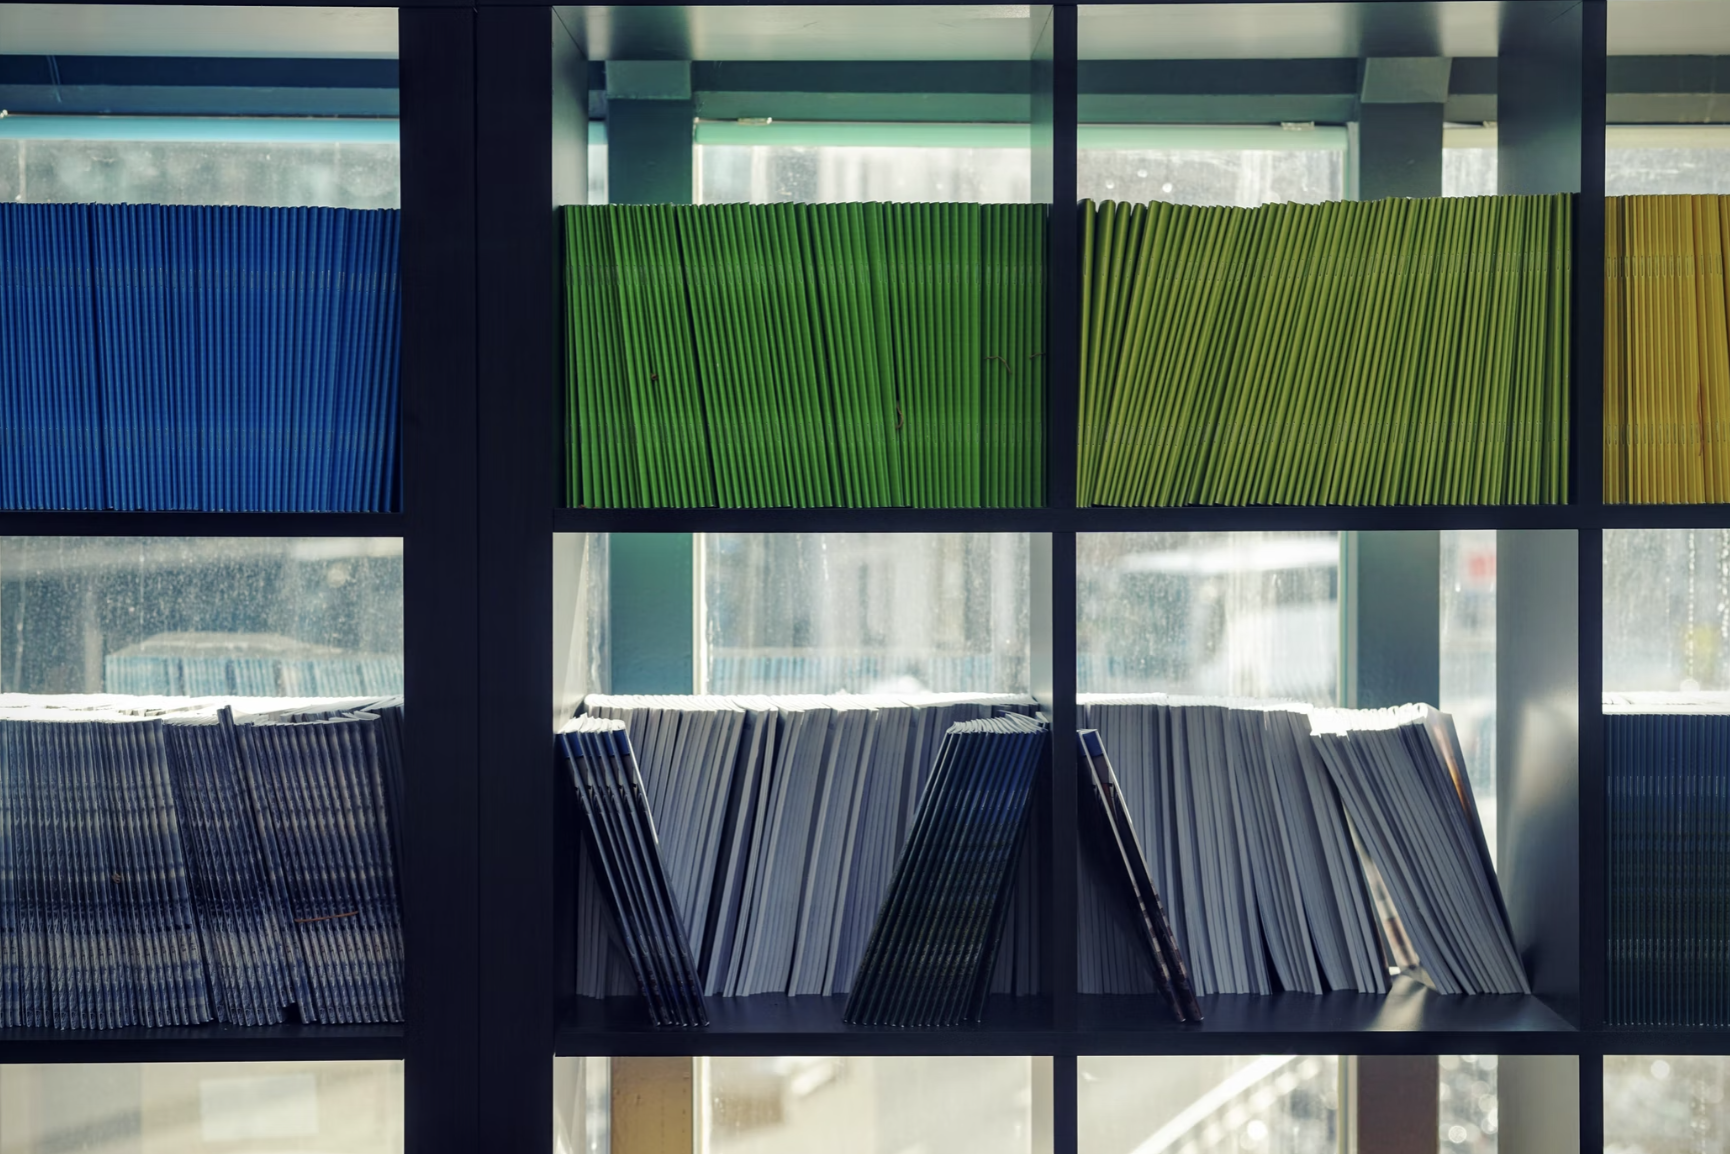 Shelves showing many coloured document folders leaning against each other